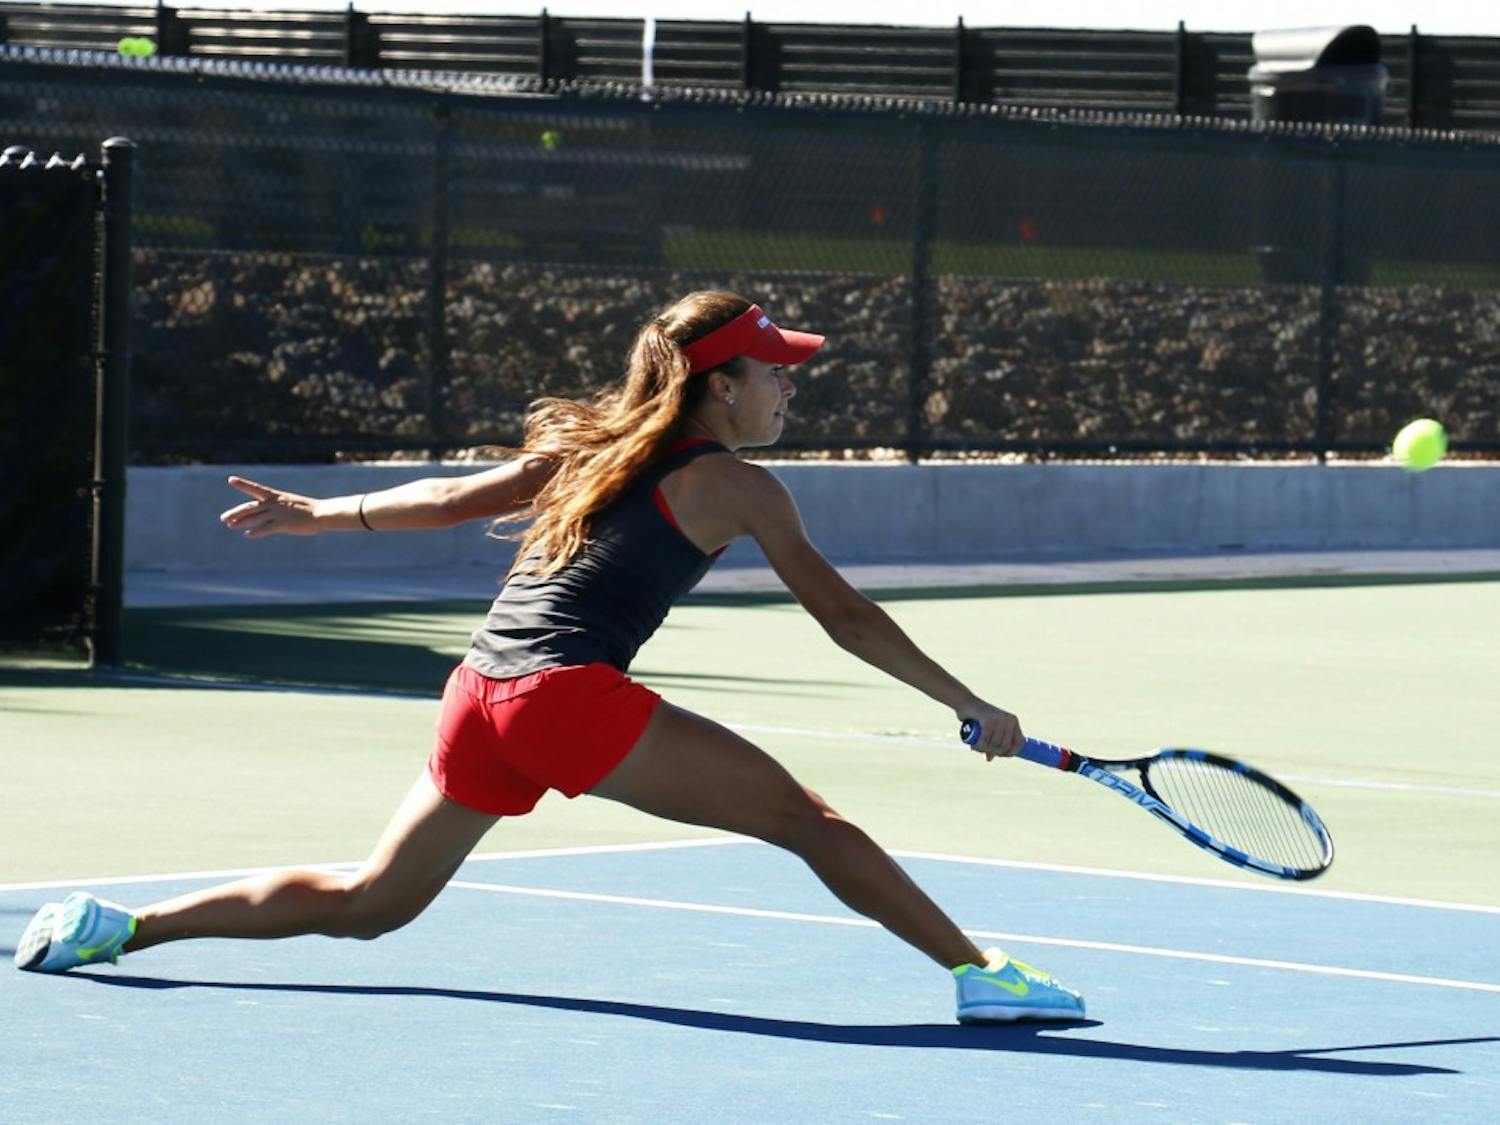 Sophomore Sharon Coone lunges for the ball against a UTEP player at the McKinnon Family Tennis Center Sunday Nov. 1. The Women's tennis team will return in the spring after not qualifying for the UTSA/ITA.